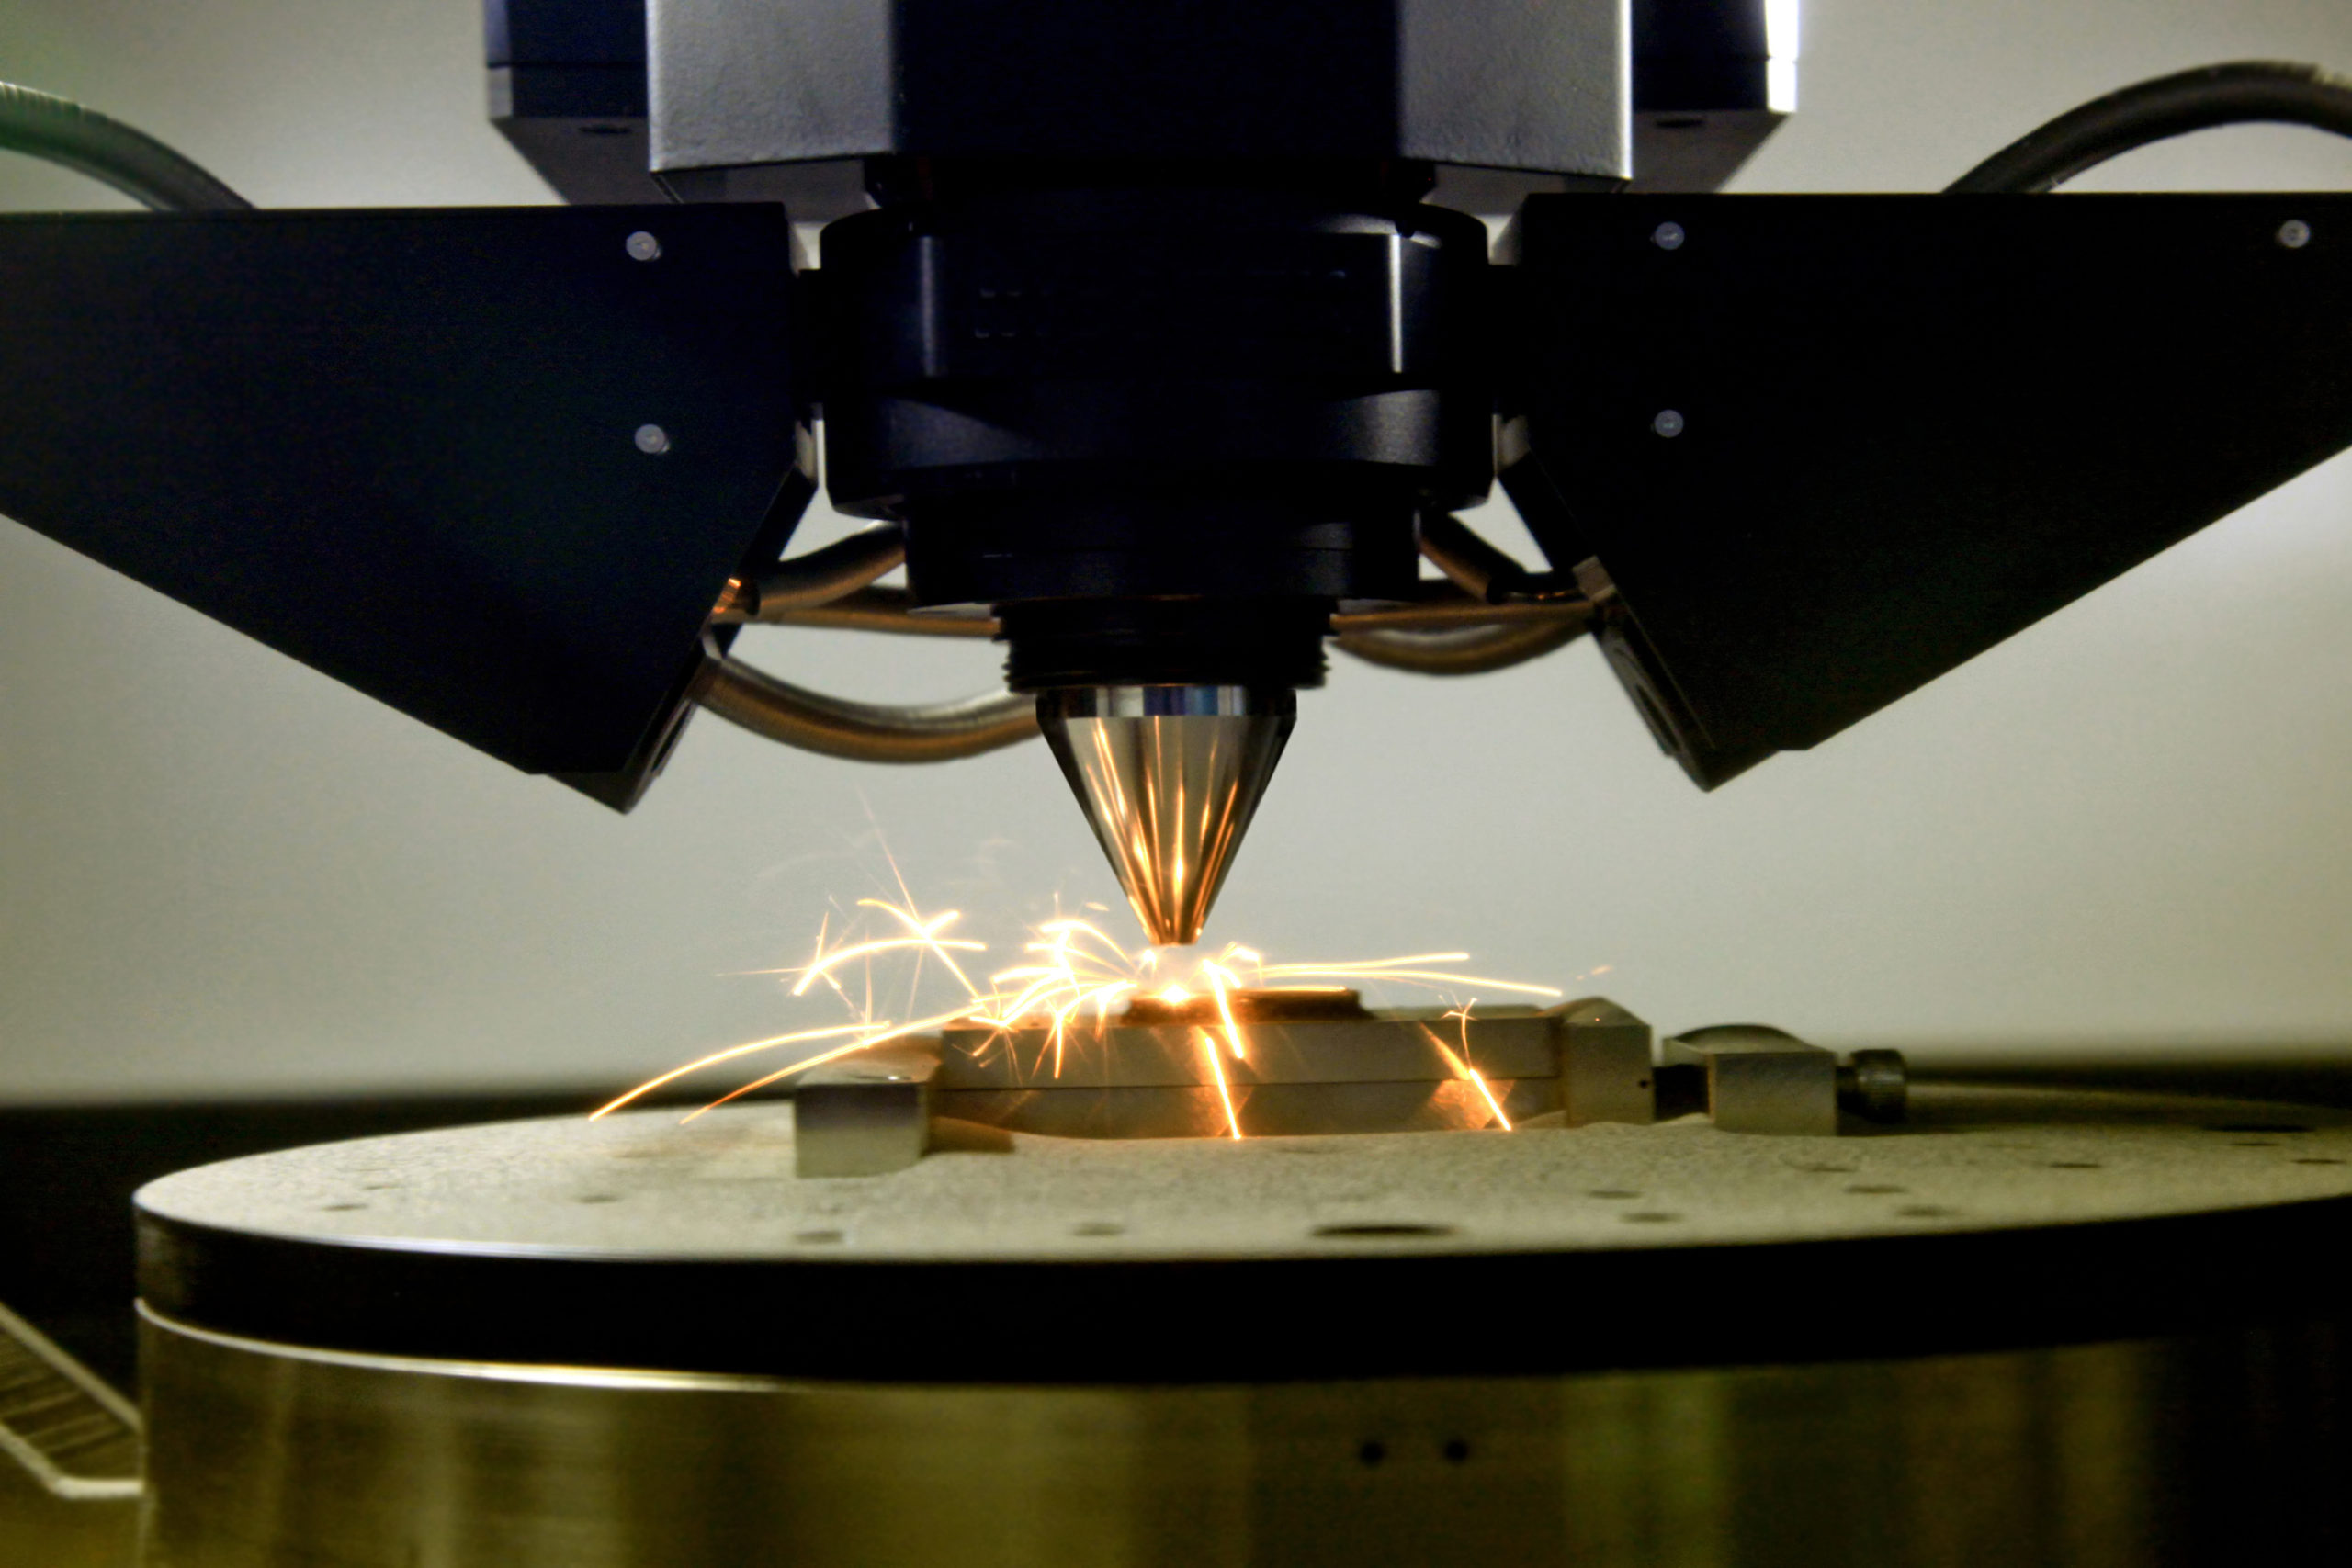 close-up of sparks flying off a 3D printer as it prints metal.